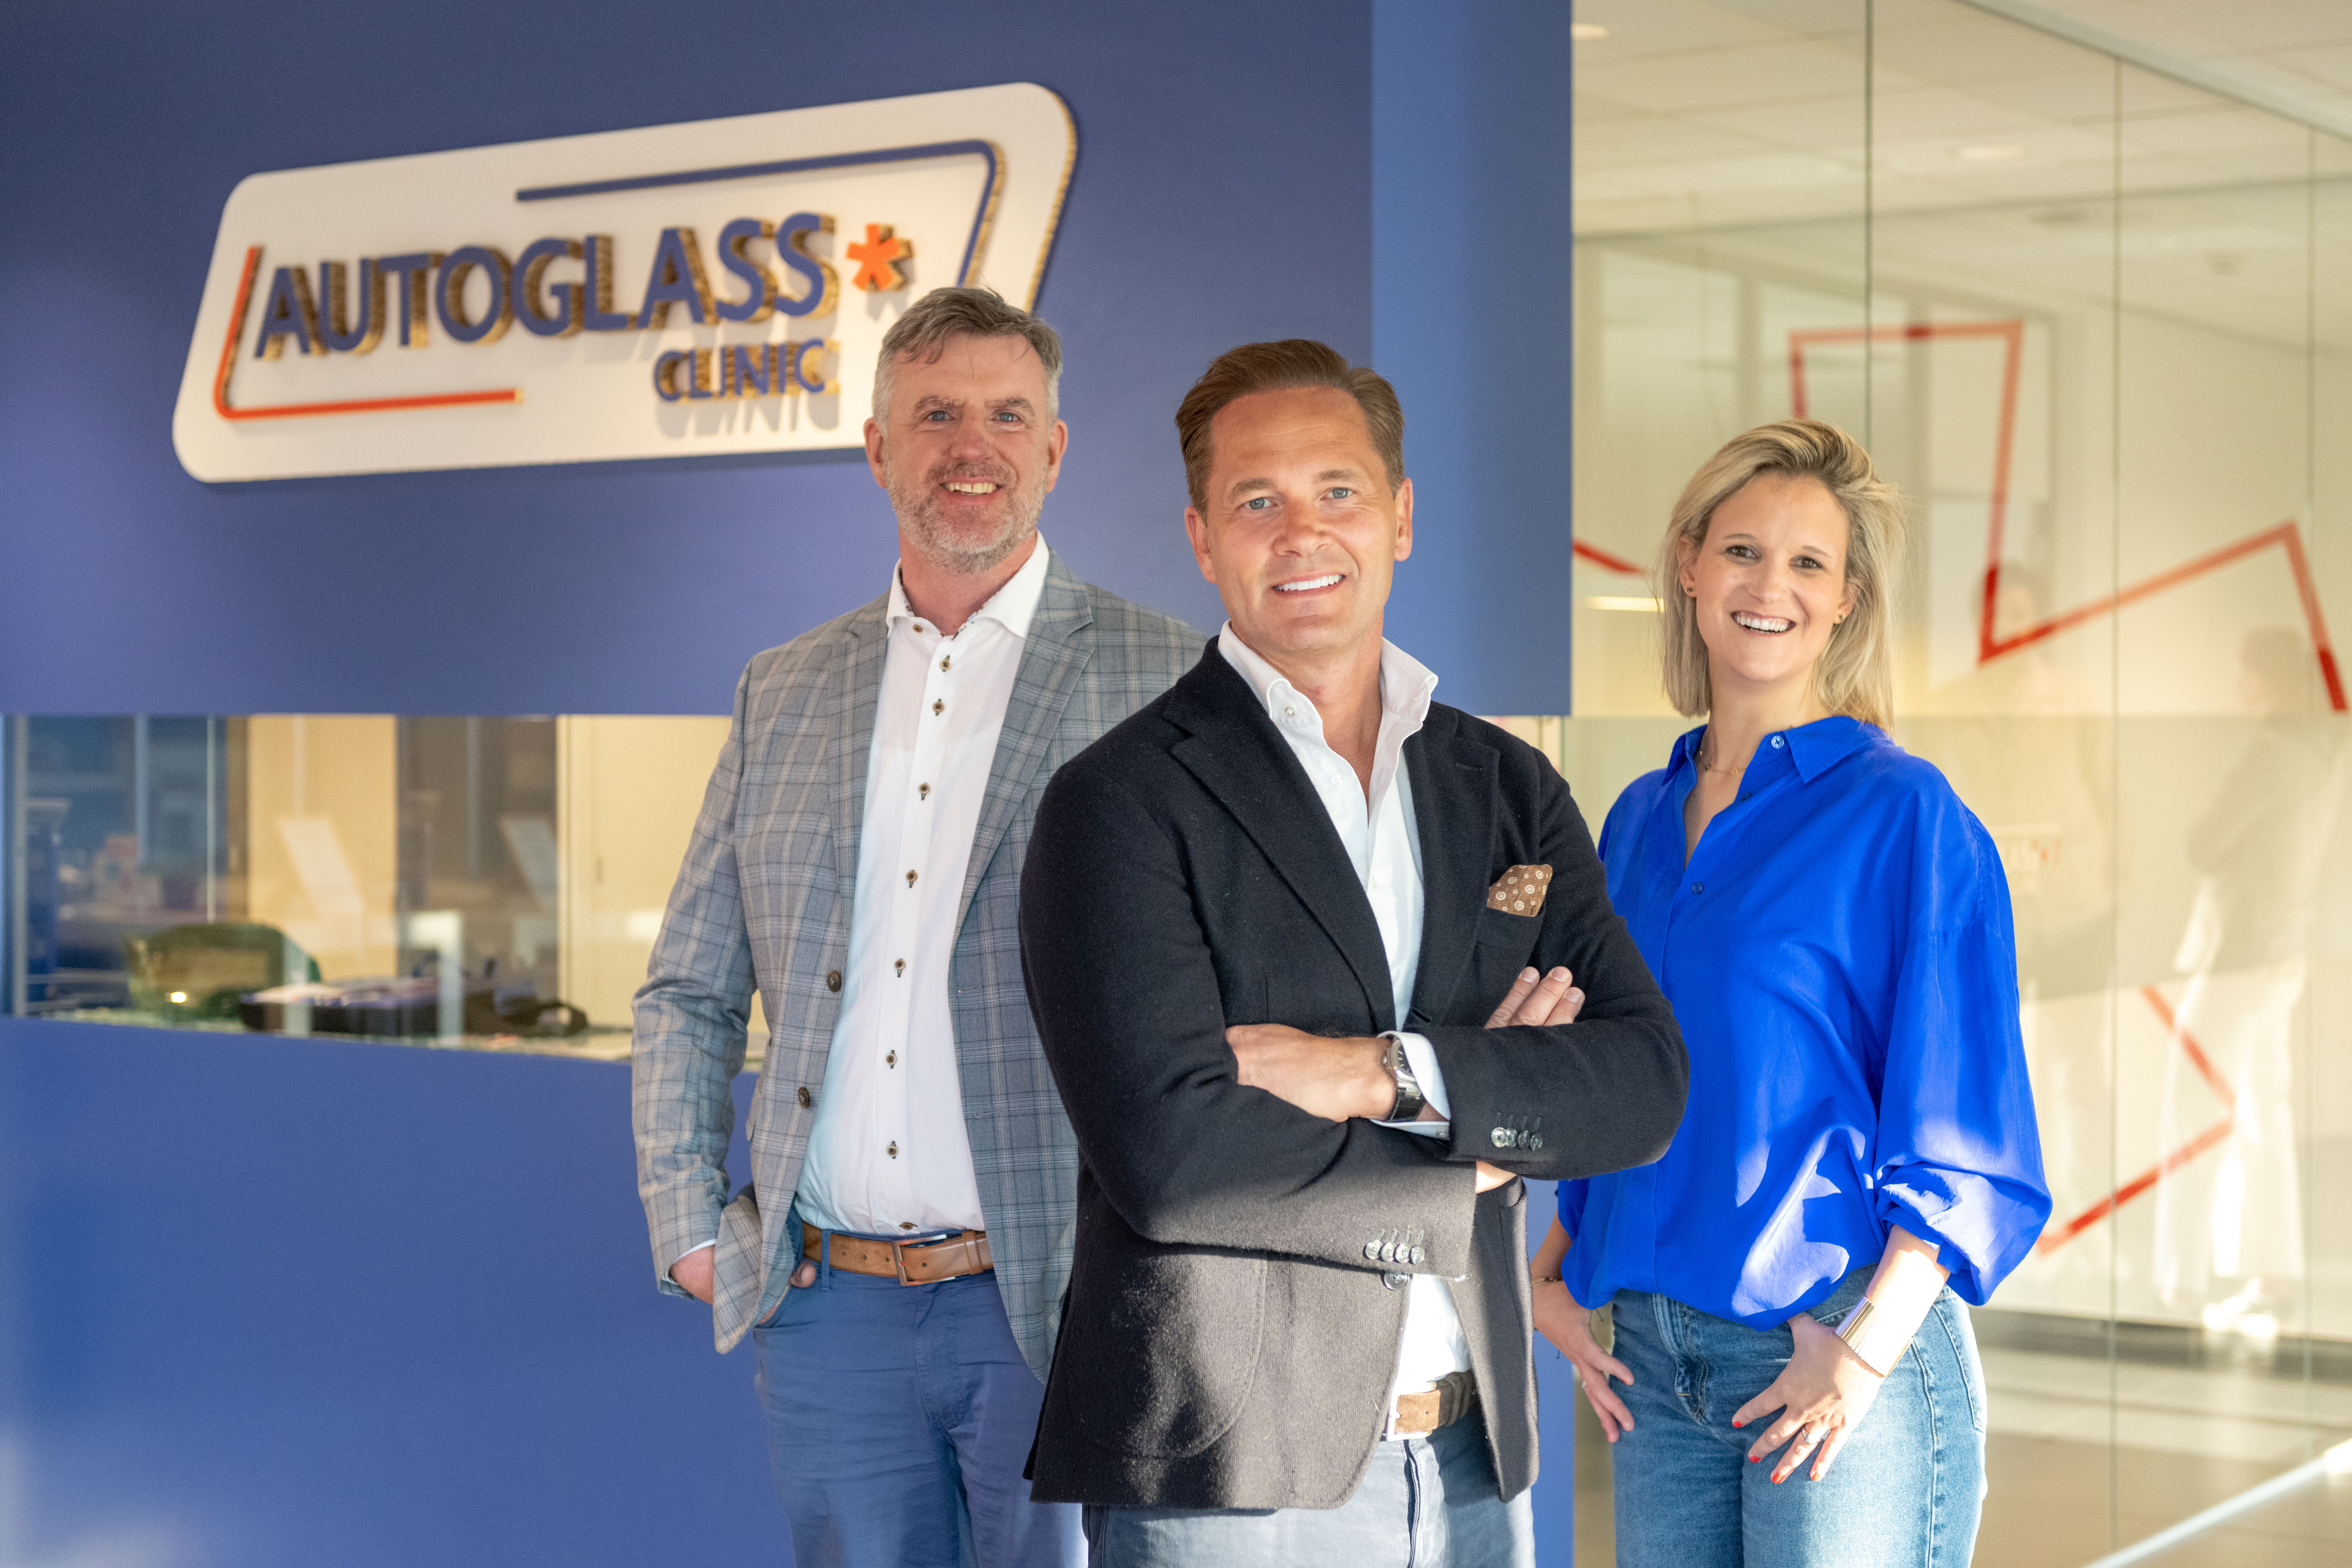 Joeri Lieten (CEO) and Charline Leroi (managing director)
of Autoglass Clinic together with Anders Jensen (CEO) of Cary Group